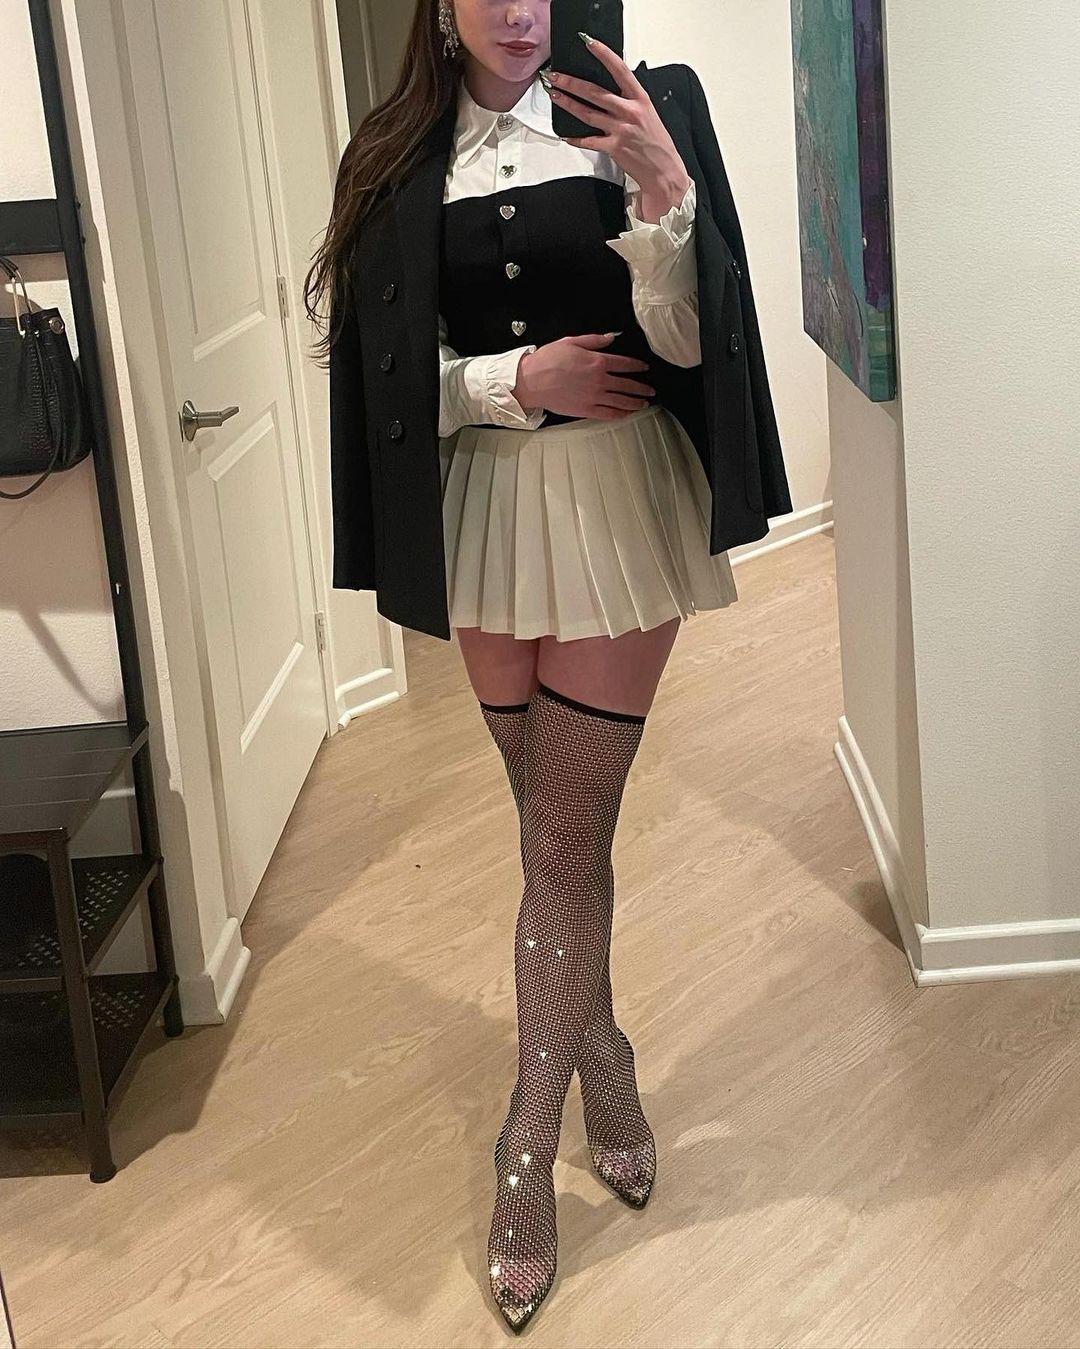 McKayla Maroney In Sparkly Thigh-High Fishnets, That's It!